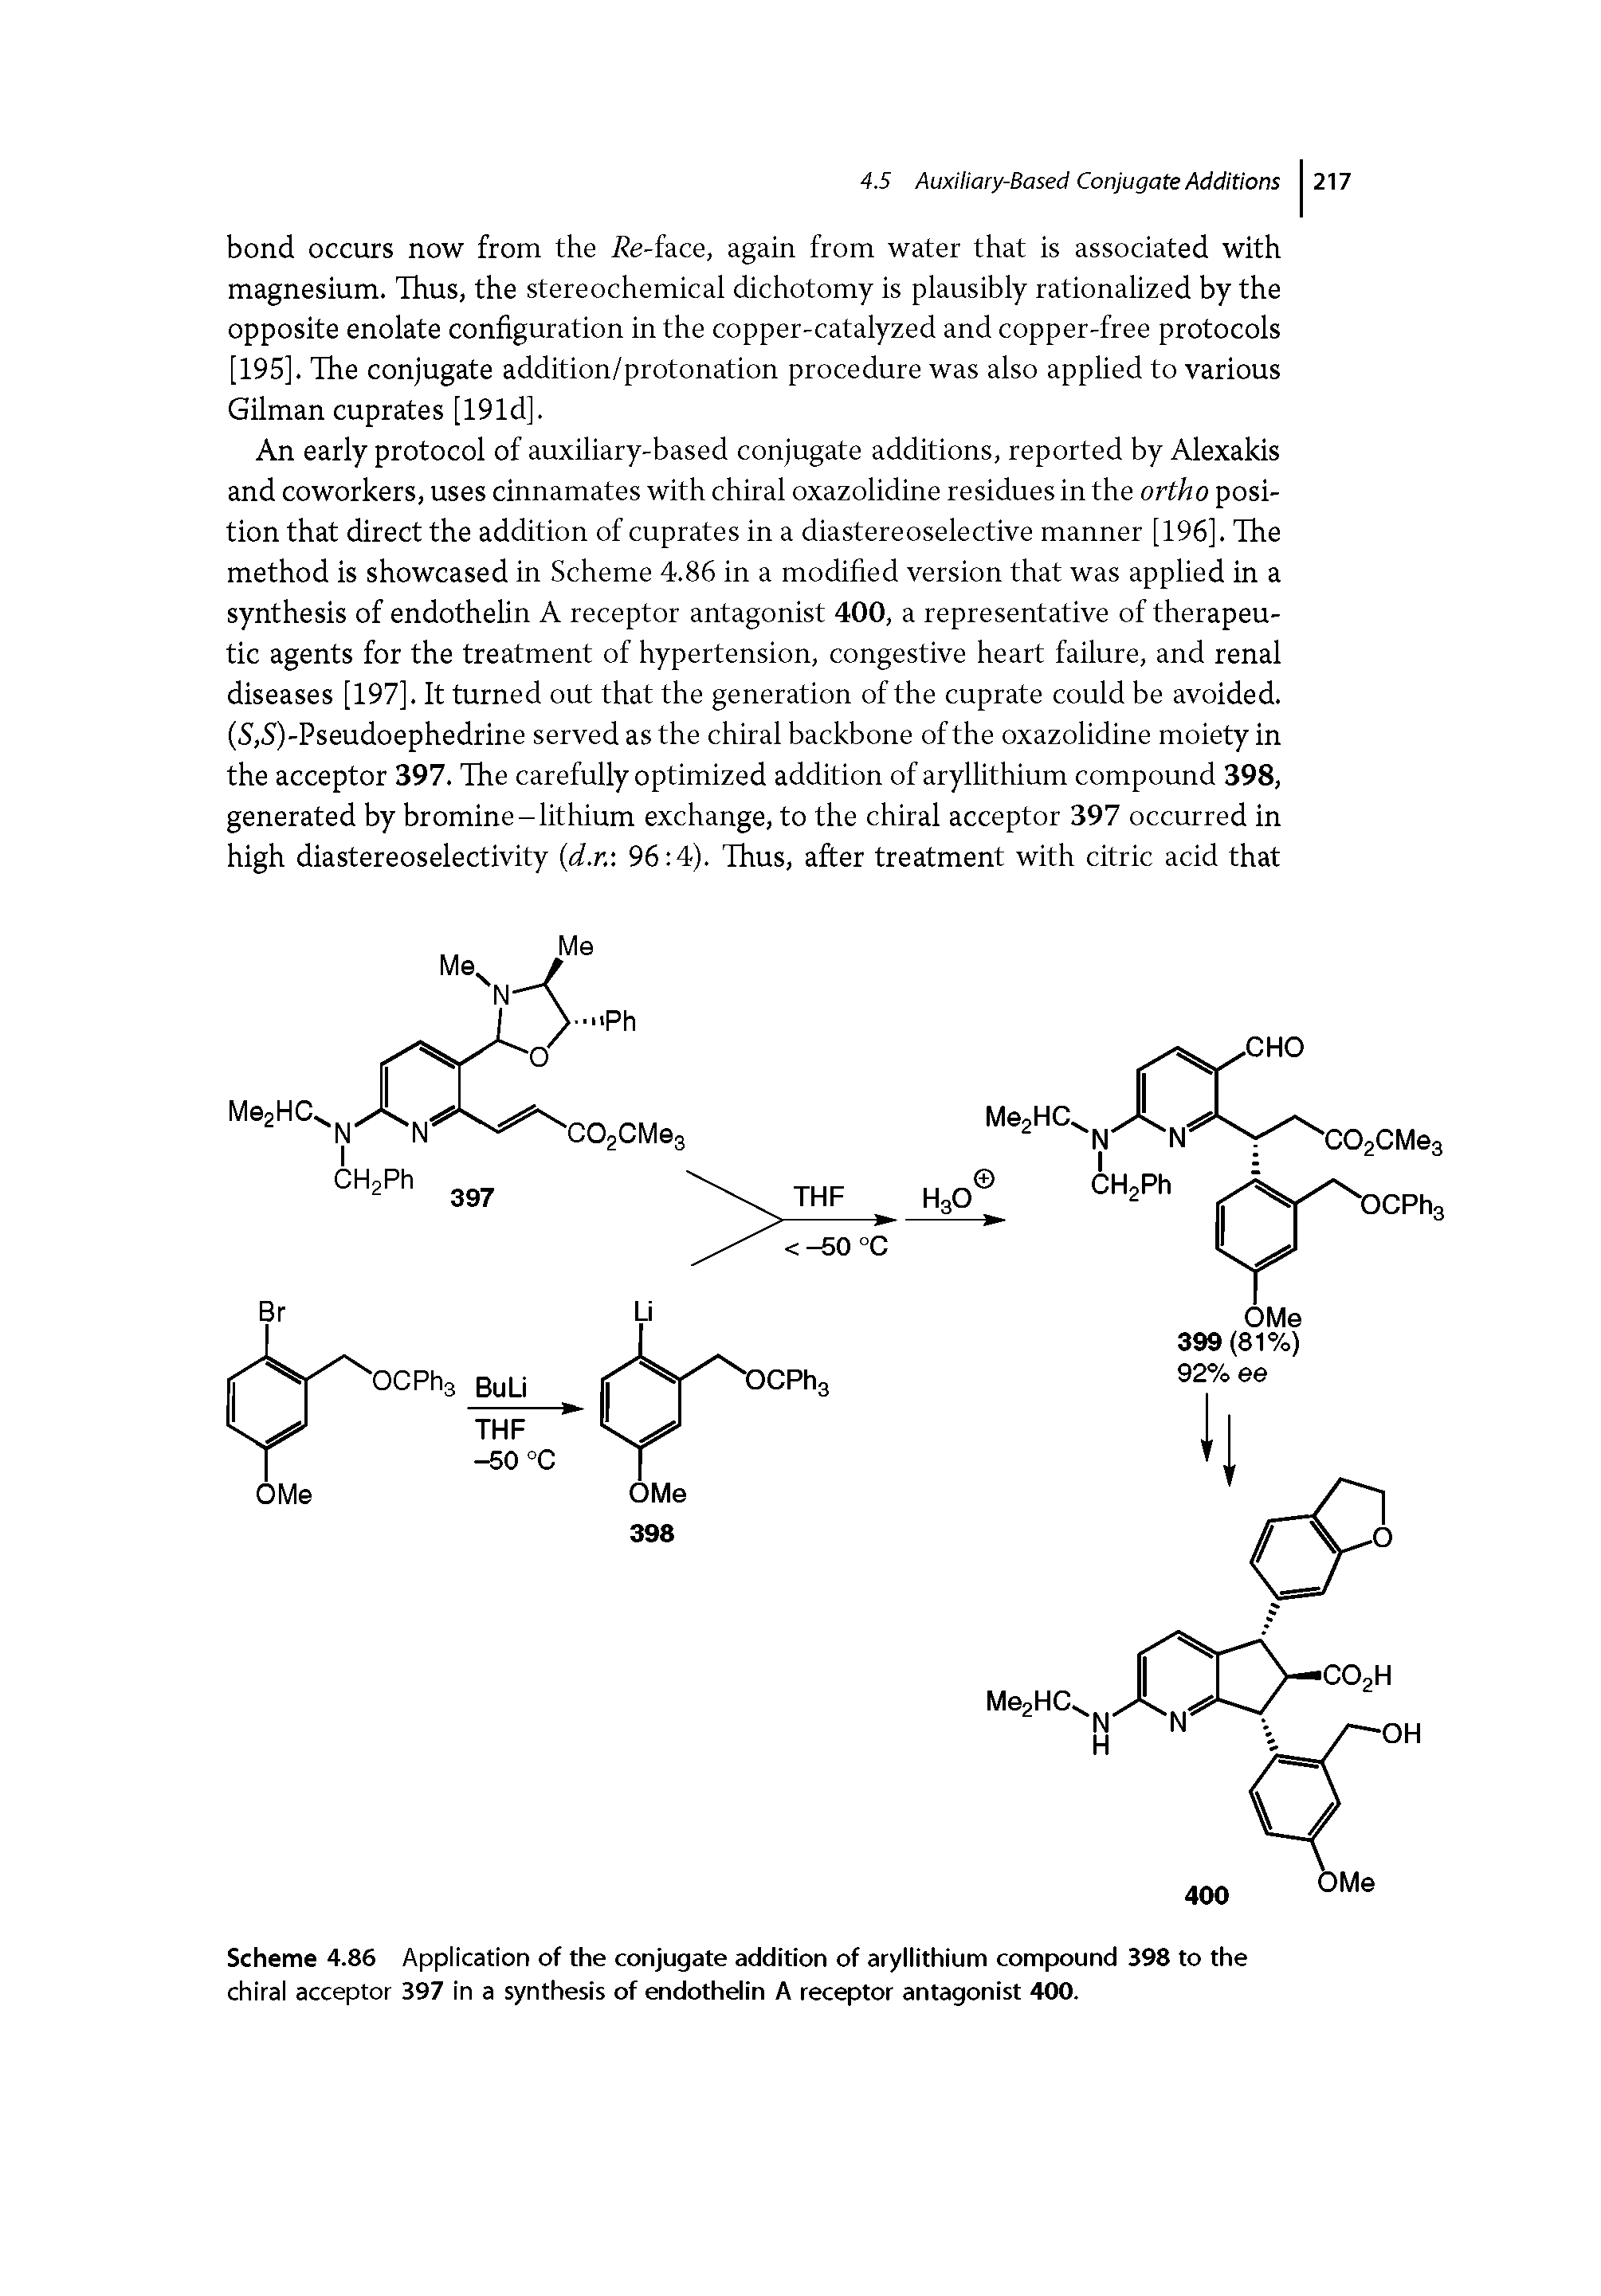 Scheme 4.86 Application of the conjugate addition of aryiiithium compound 398 to the chiral acceptor 397 in a synthesis of endothelin A receptor antagonist 400.